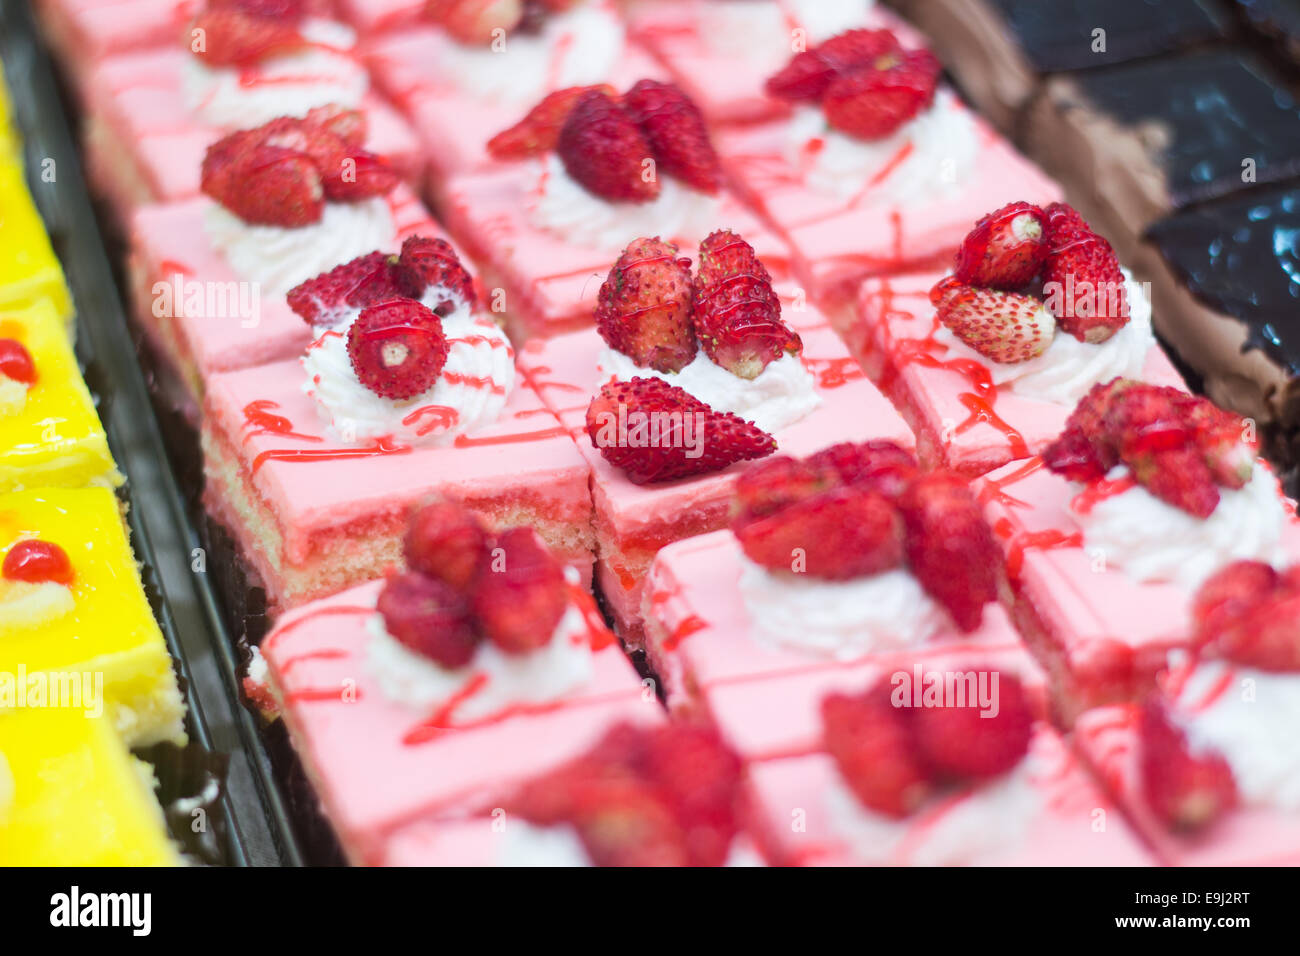 desserts confection confectionery sweet food Stock Photo